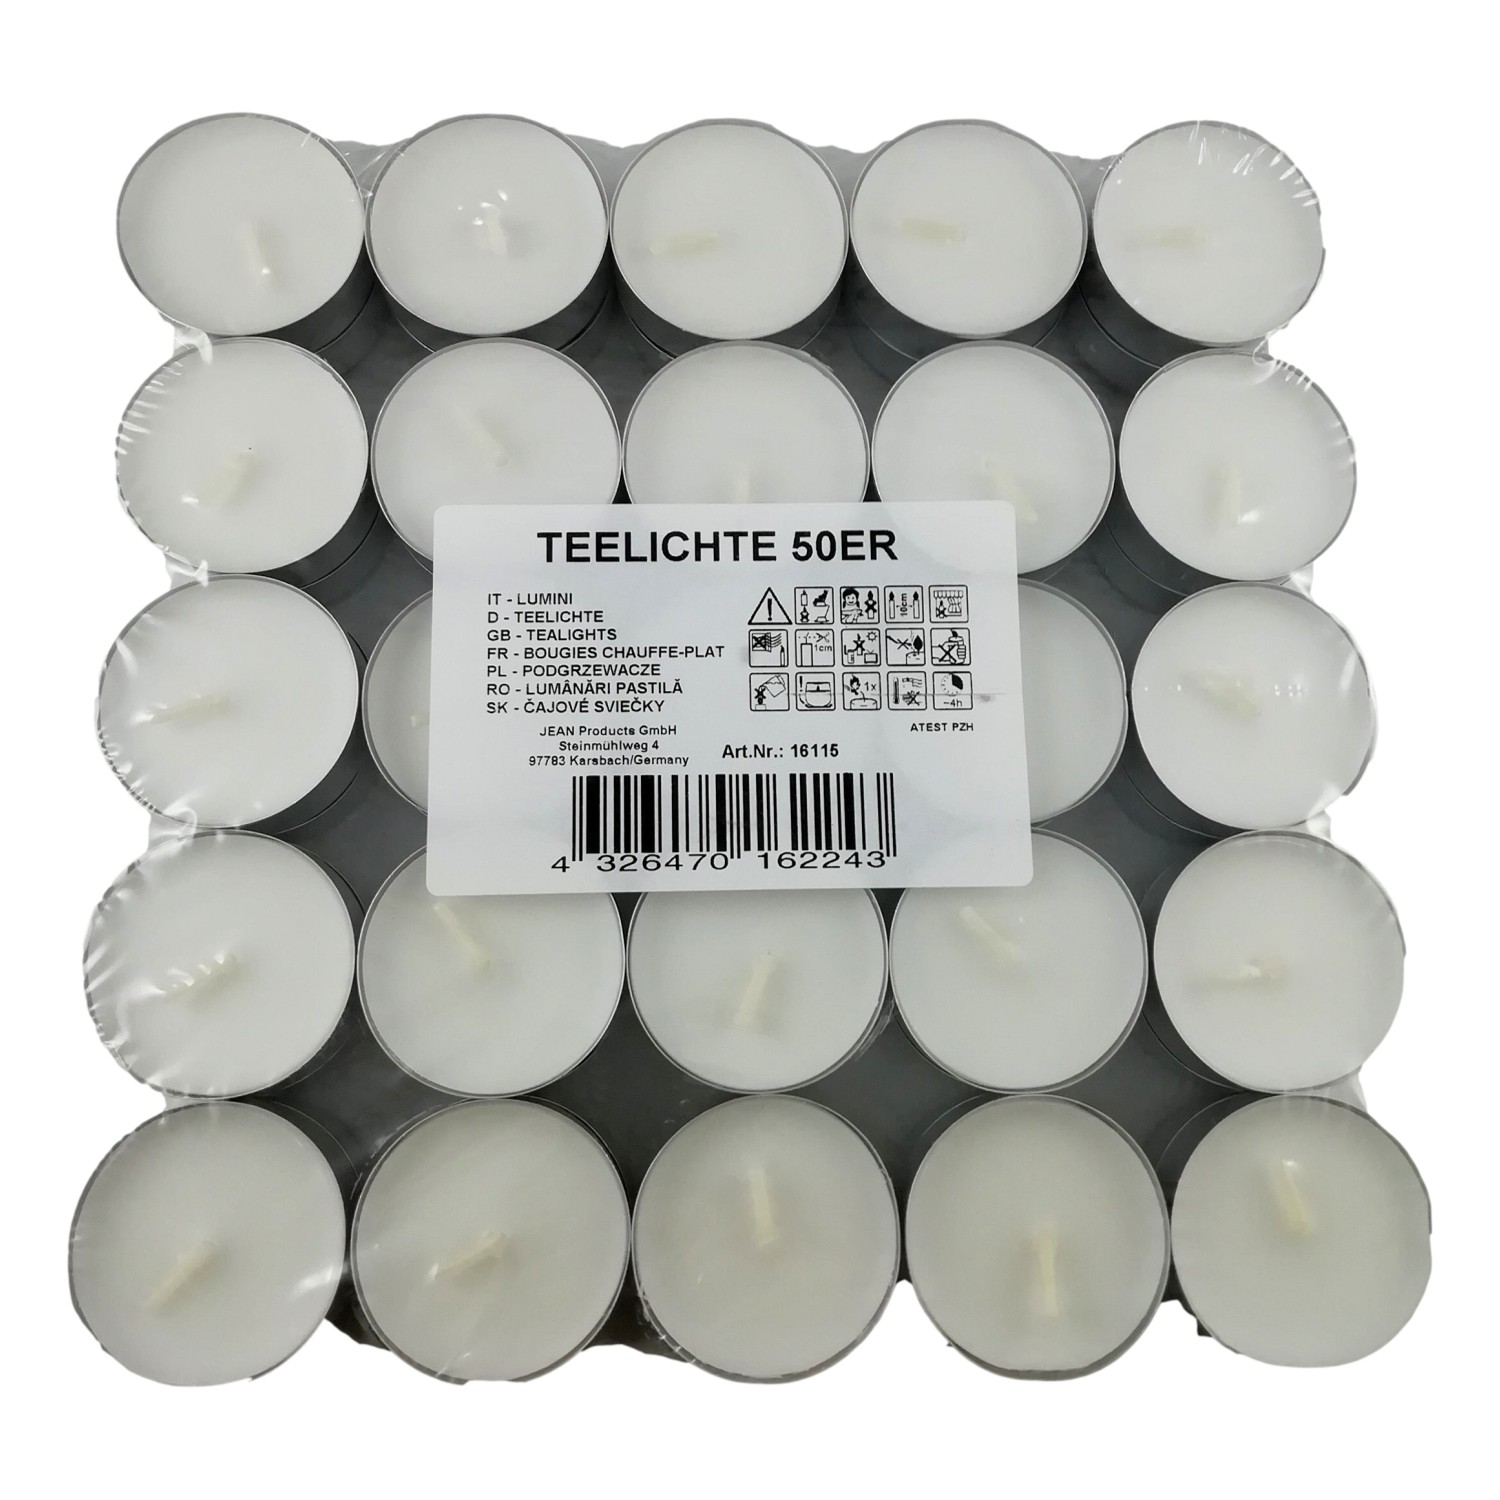 50 Bougies Chauffe Plats Durée 4 Heures Petites Candles Blanches Gros Lot Sac